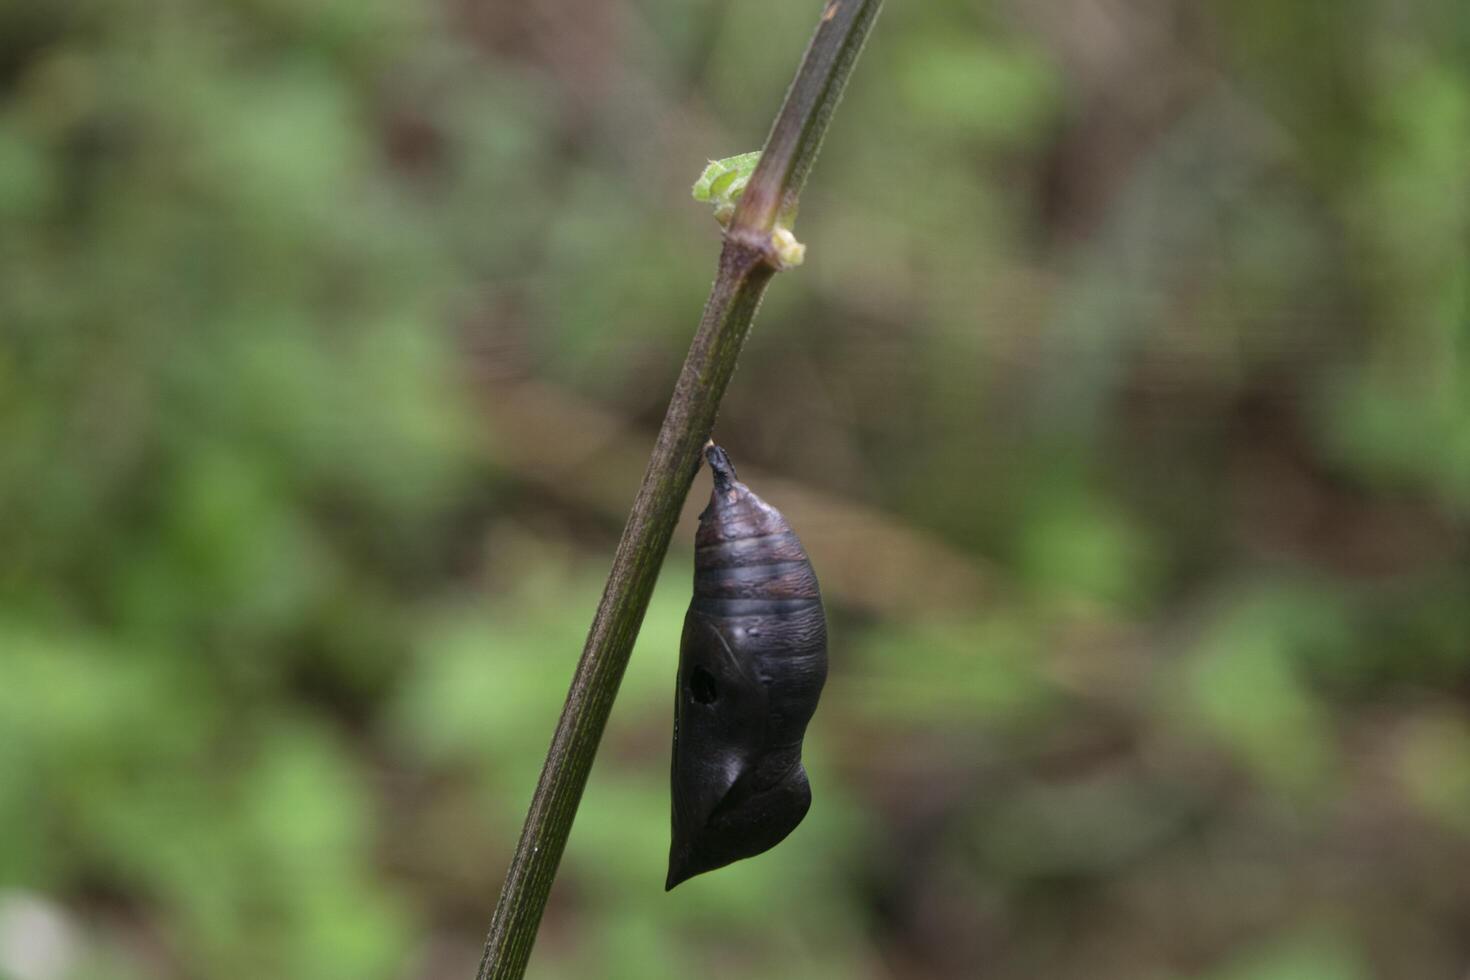 Black cocoons hang on tree branches photo